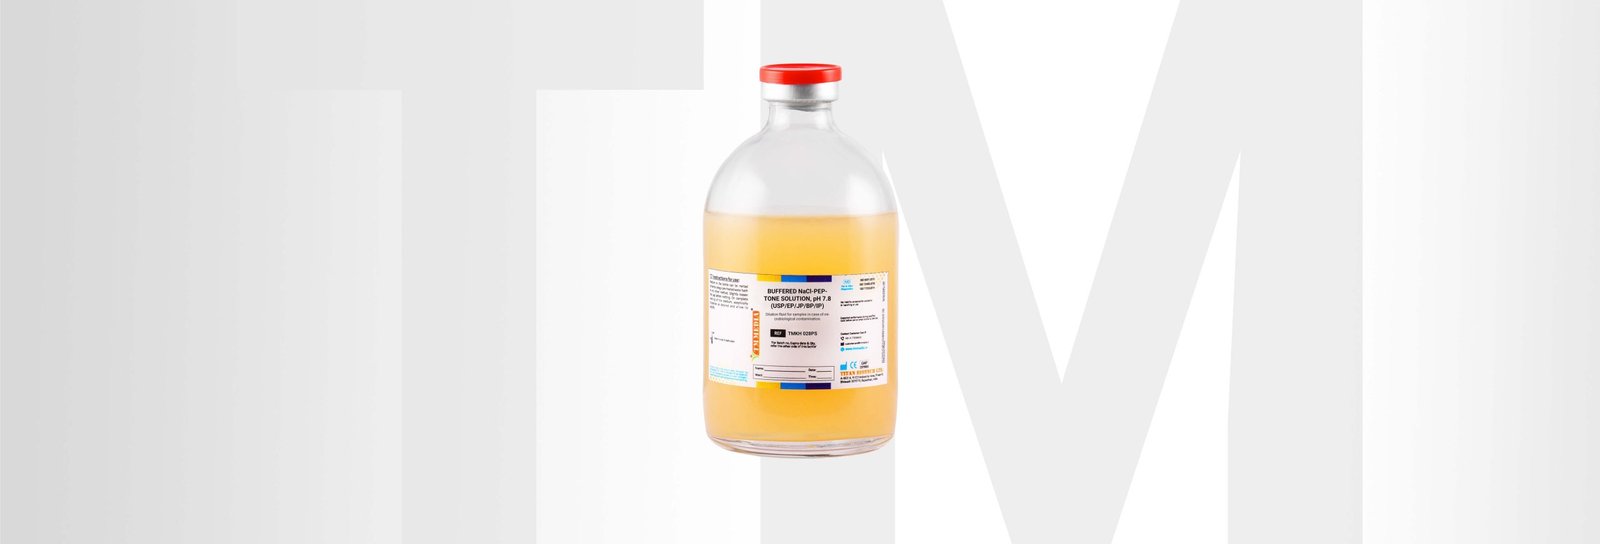 The best quality of BUFFERED NaCl-PEPTONE SOLUTION, pH 7.8 (USP/EP/JP/BP/IP) - TM Media